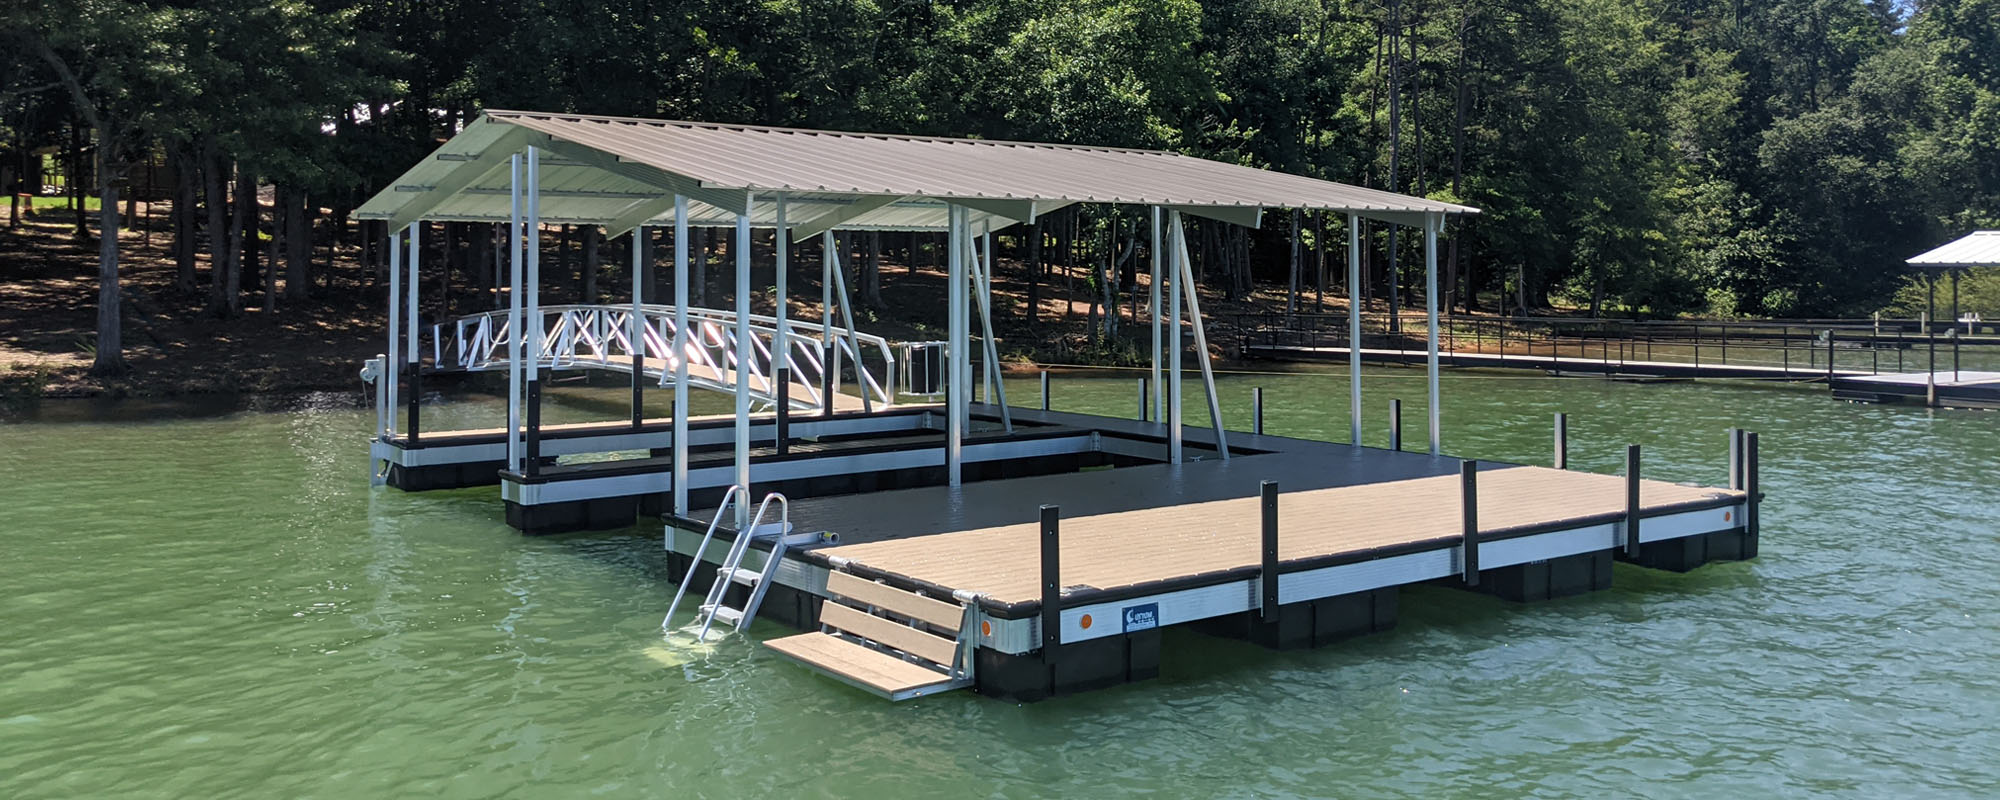 Custom Dock Systems Used Docks for Sale and Consignment at customdocksystems.com